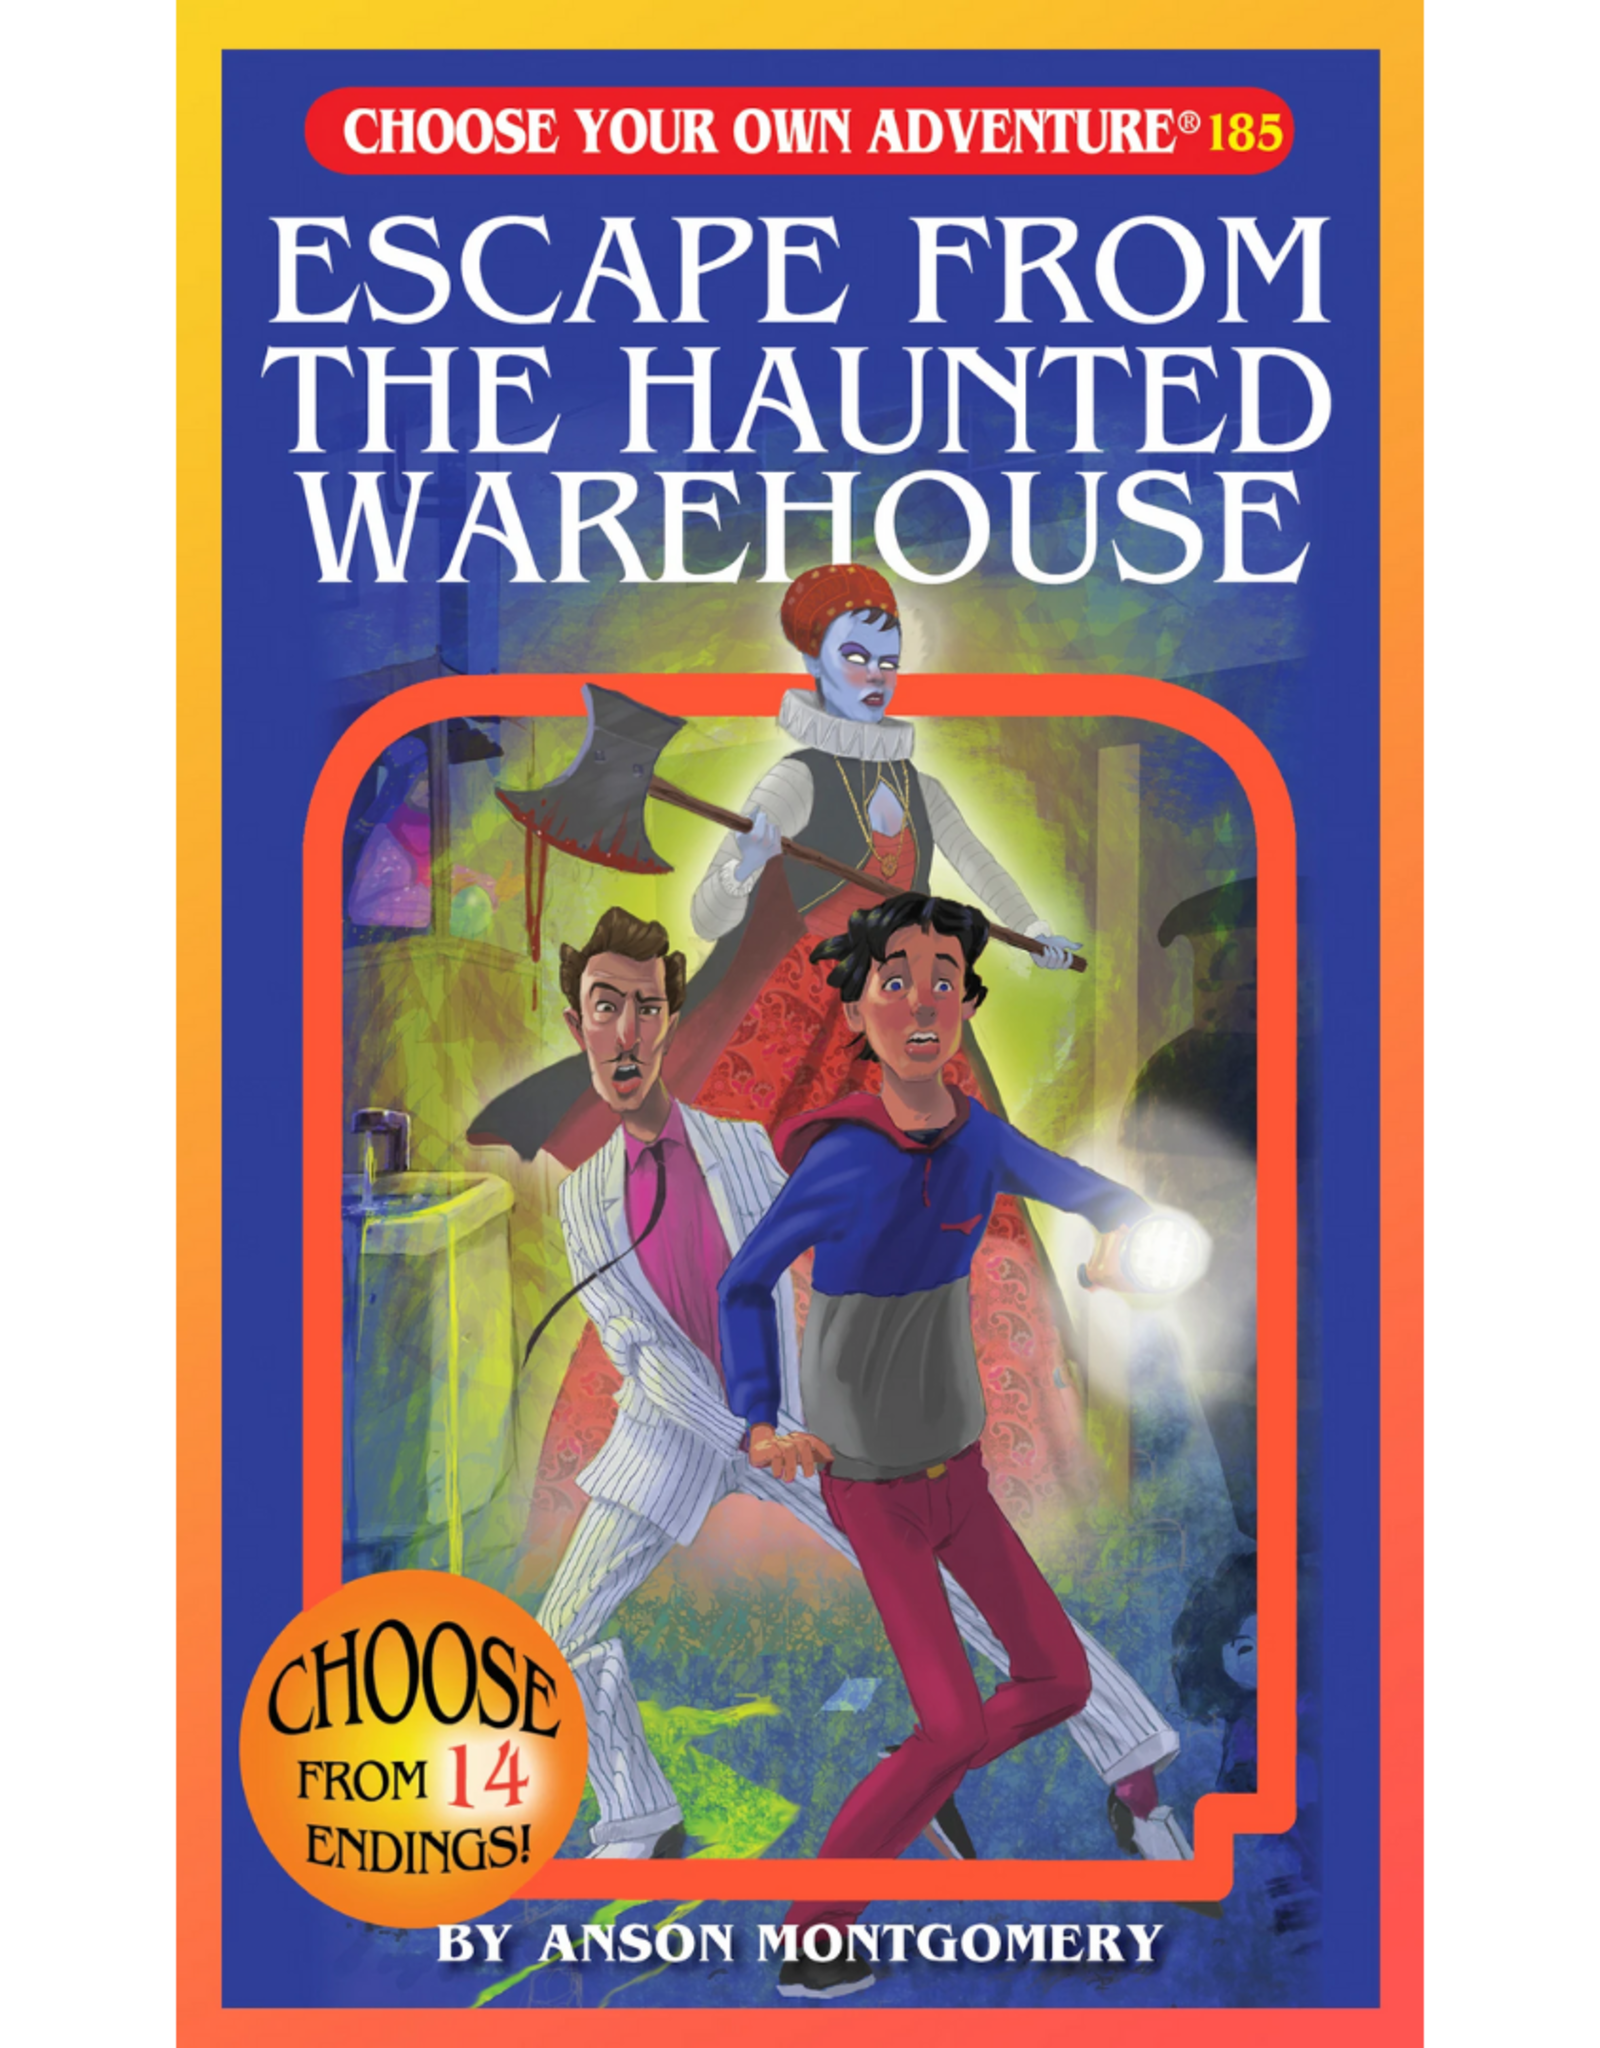 Escape from the Haunted Warehouse